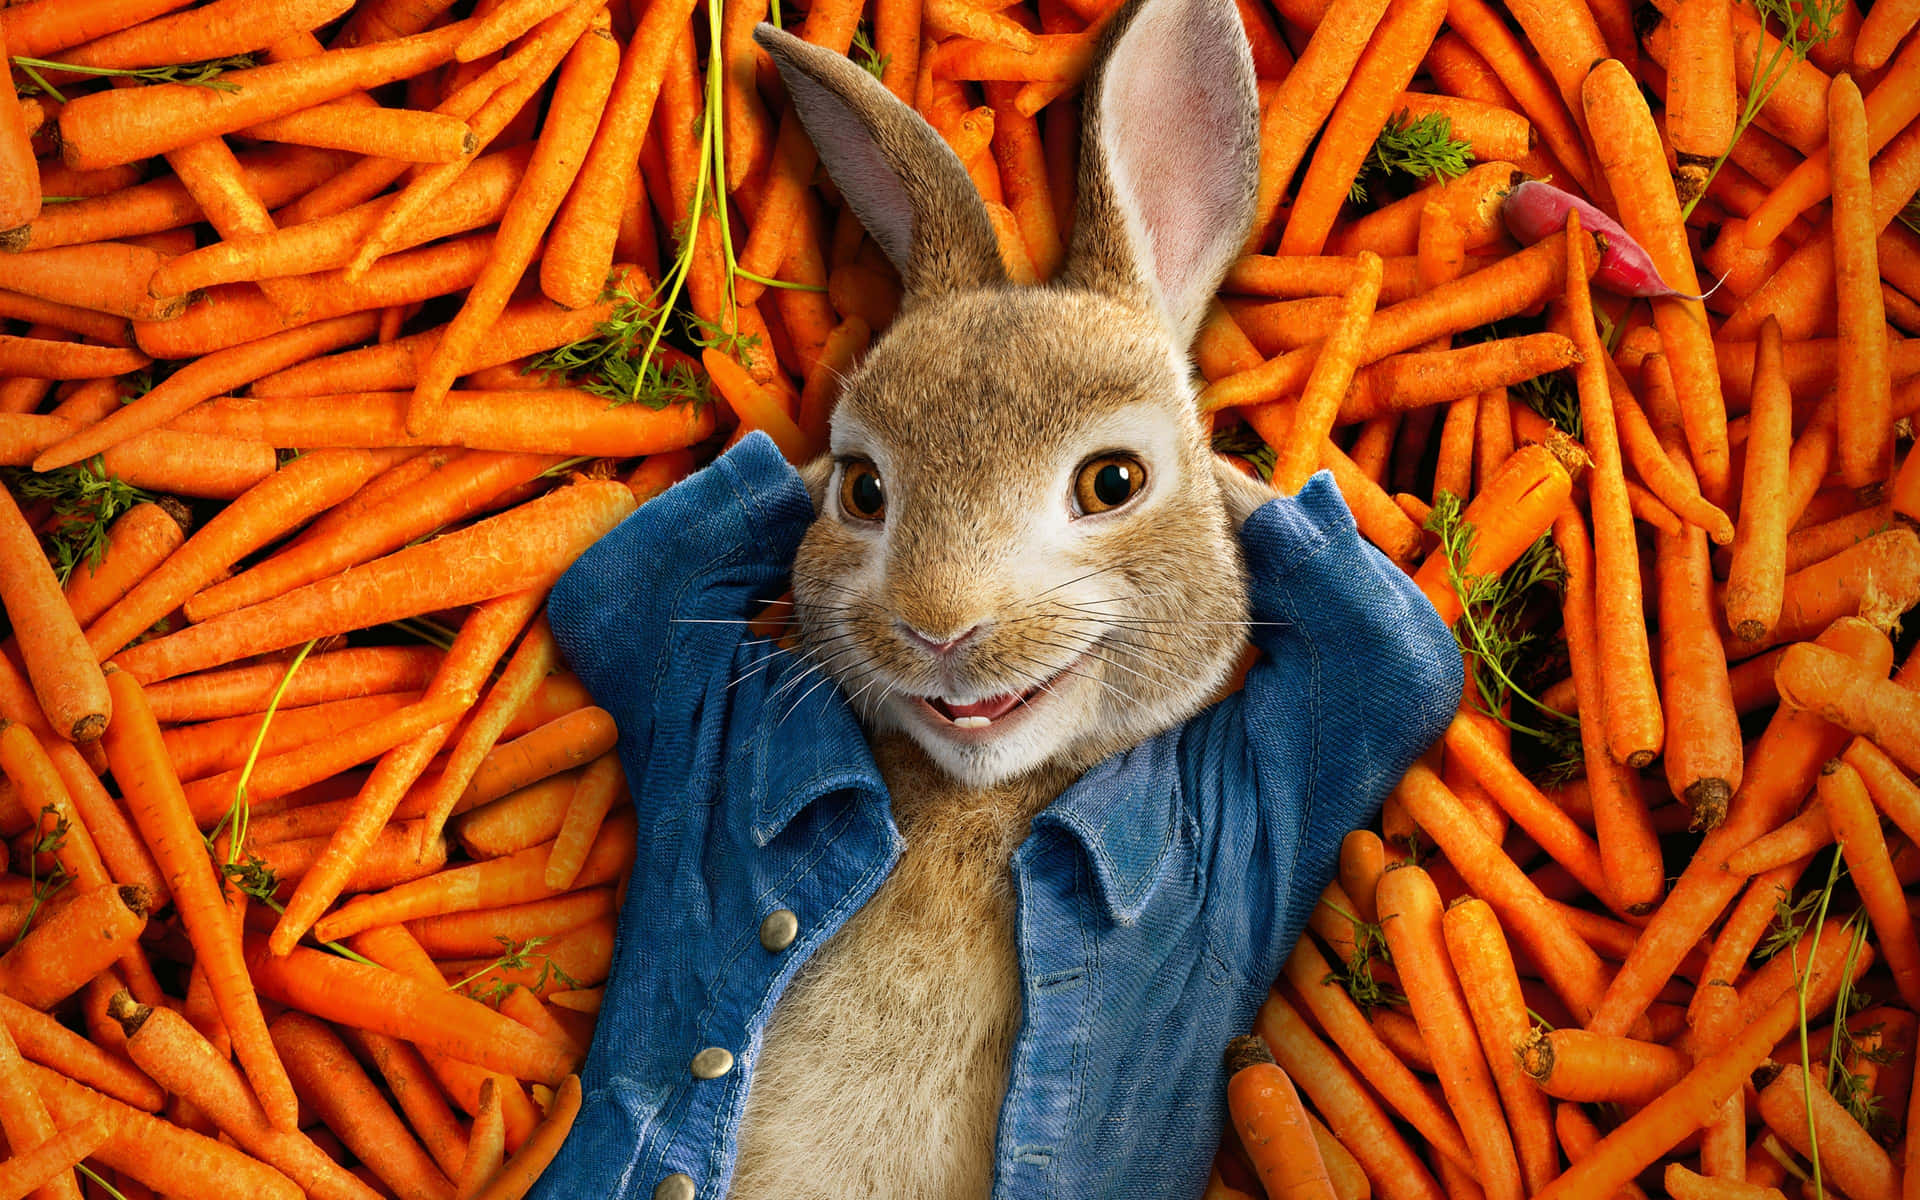 Peter Rabbit In A Pile Of Carrots